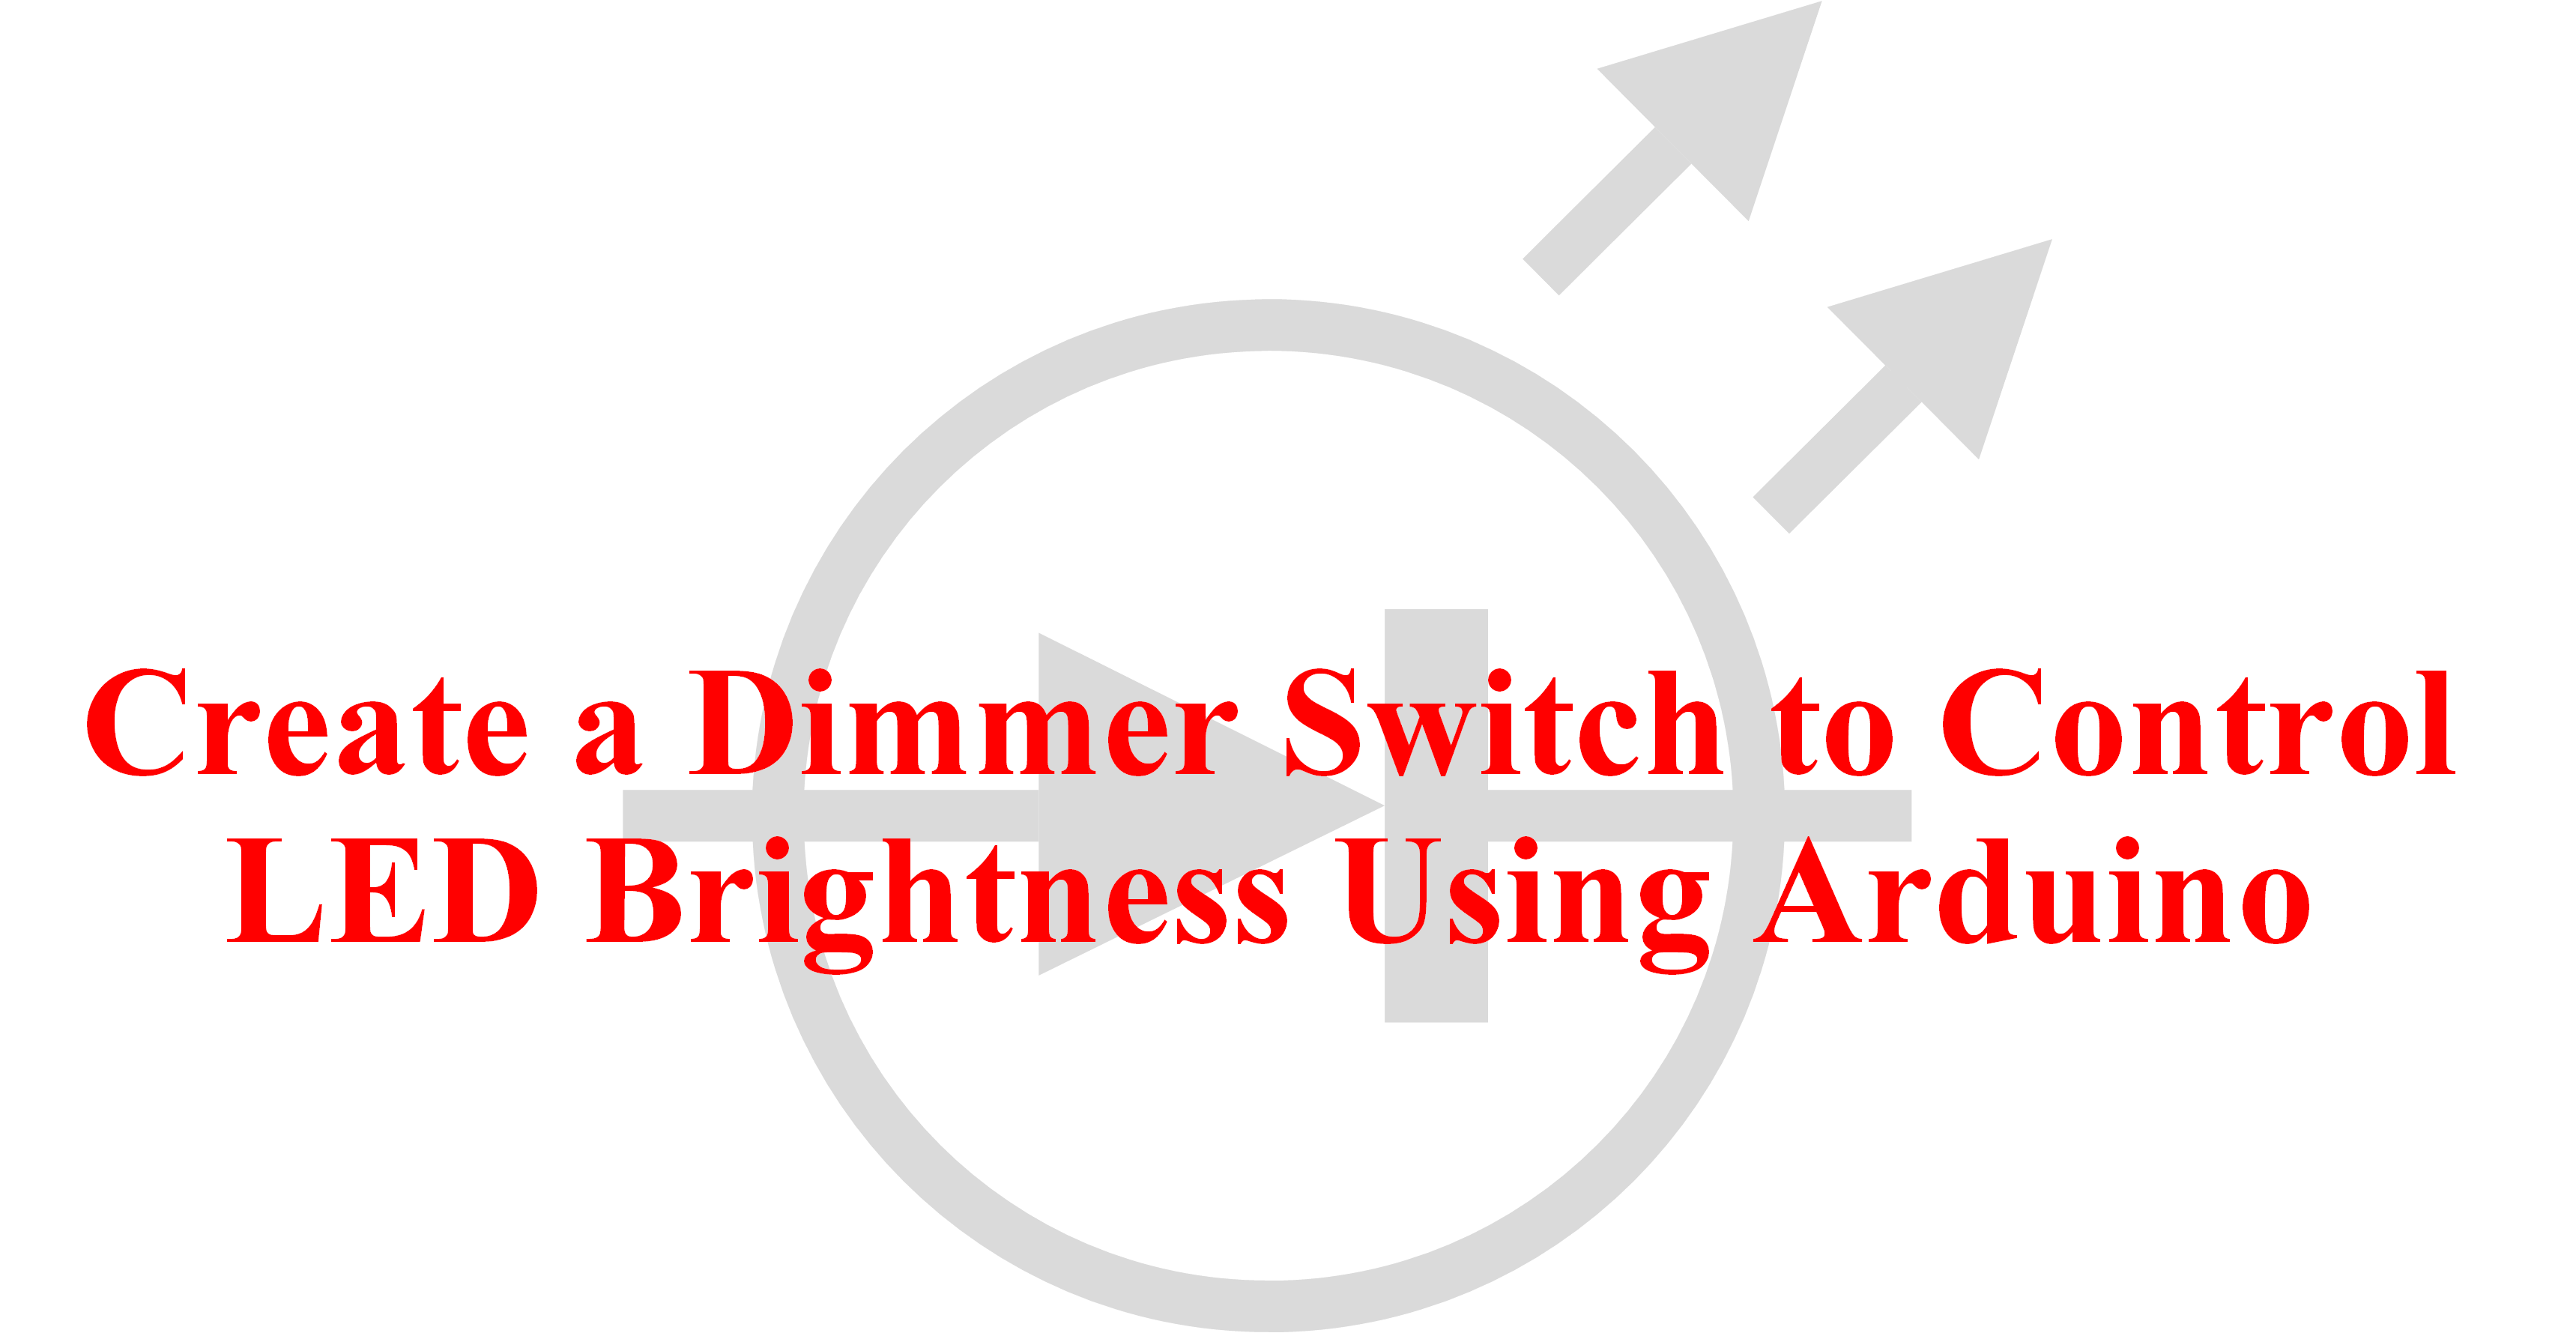 Create a Dimmer Switch to Control LED Brightness Using Arduino